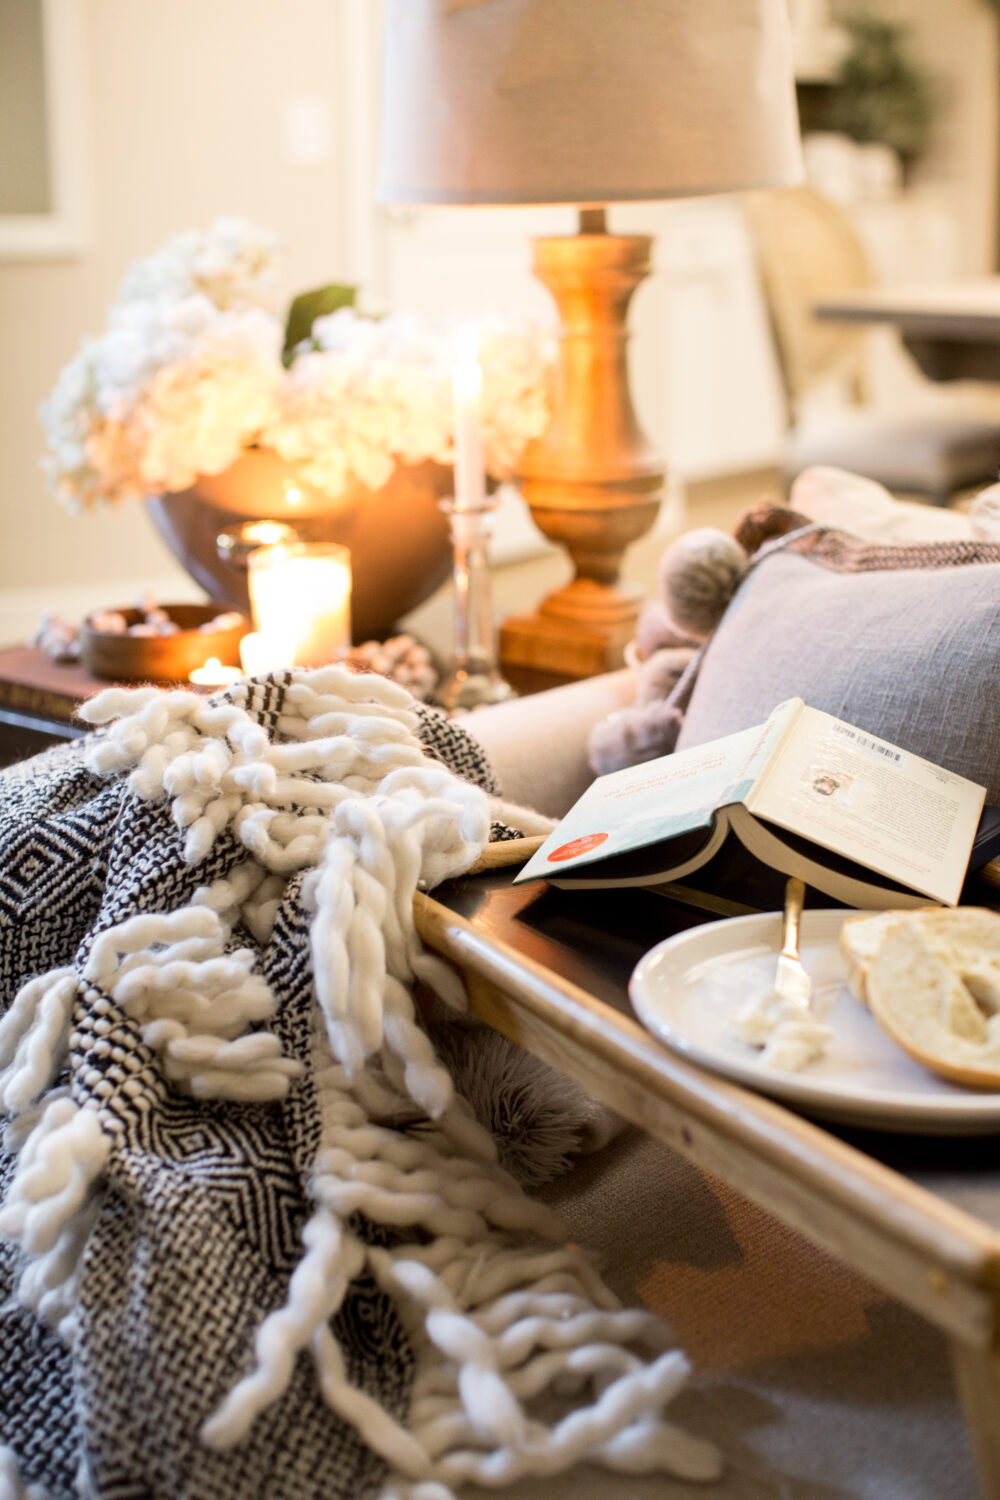 Bed Tray Refresh for a Comfy and Warm Hygge Moment